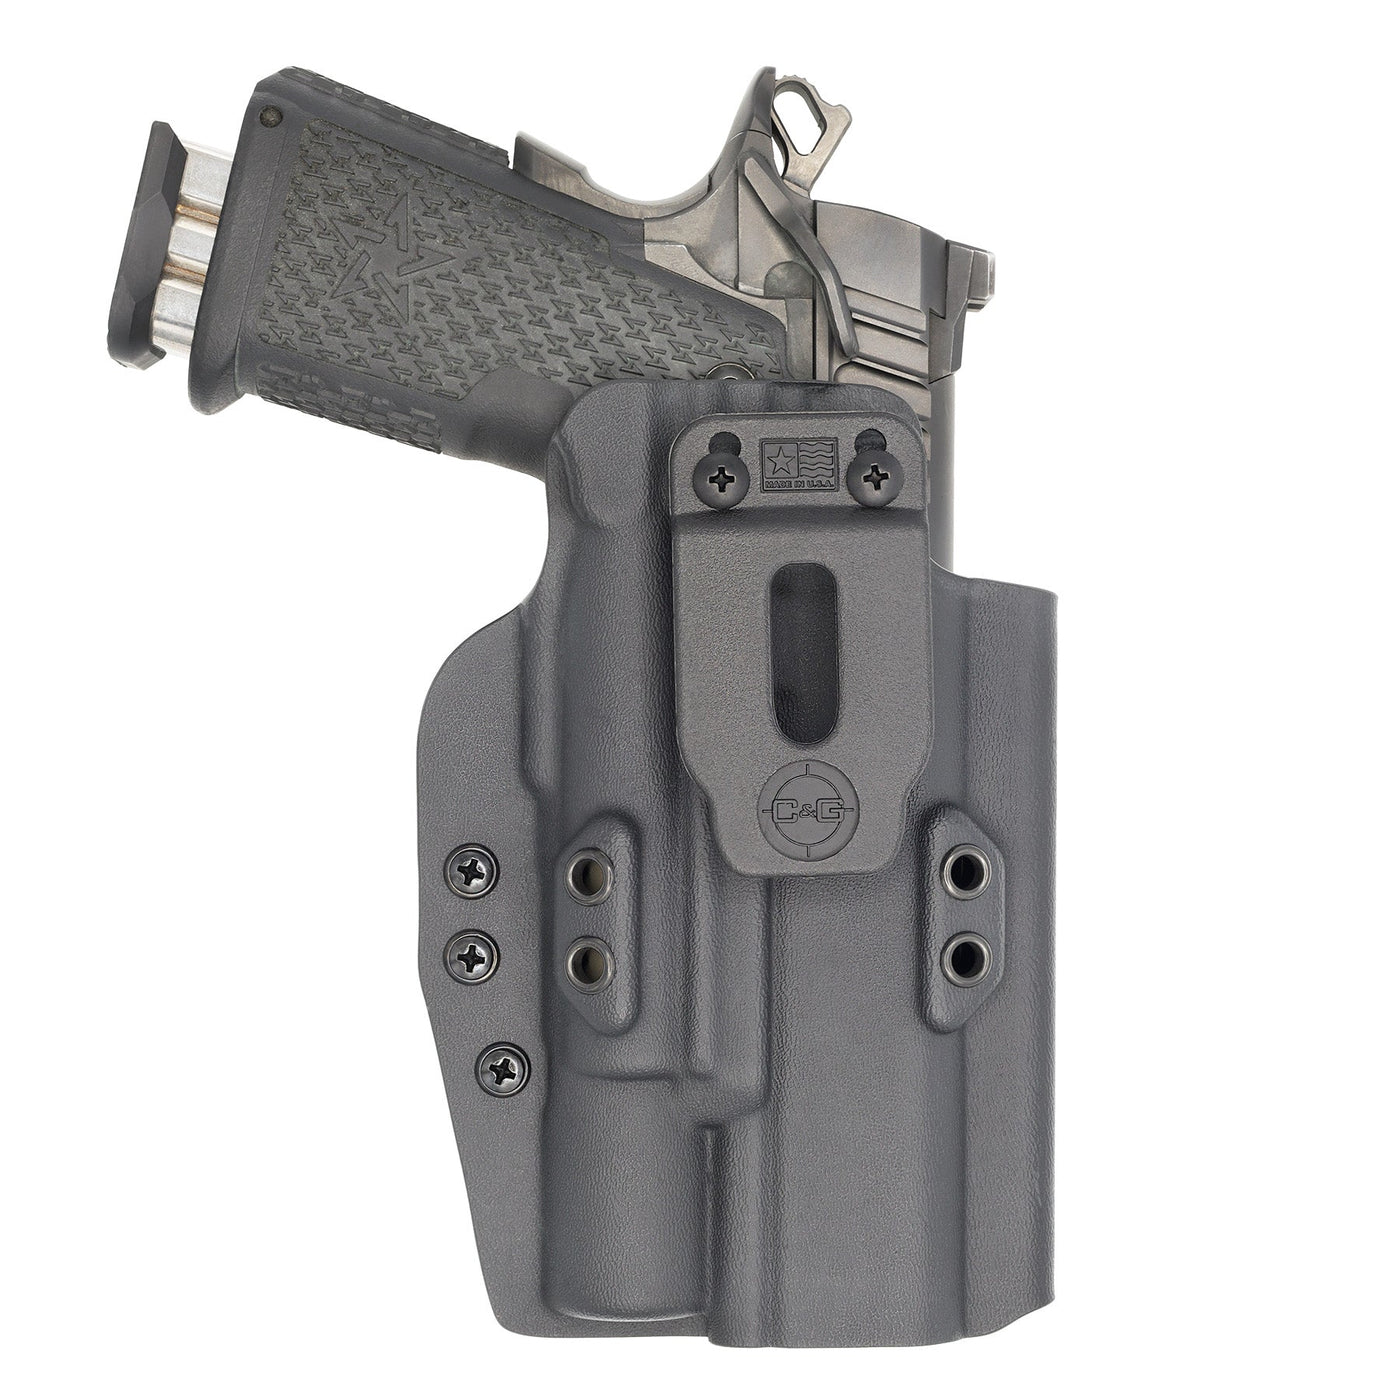 C&G Holsters Quickship IWB Tactical 1911 DS Prodigy Surefire X300 in holstered position